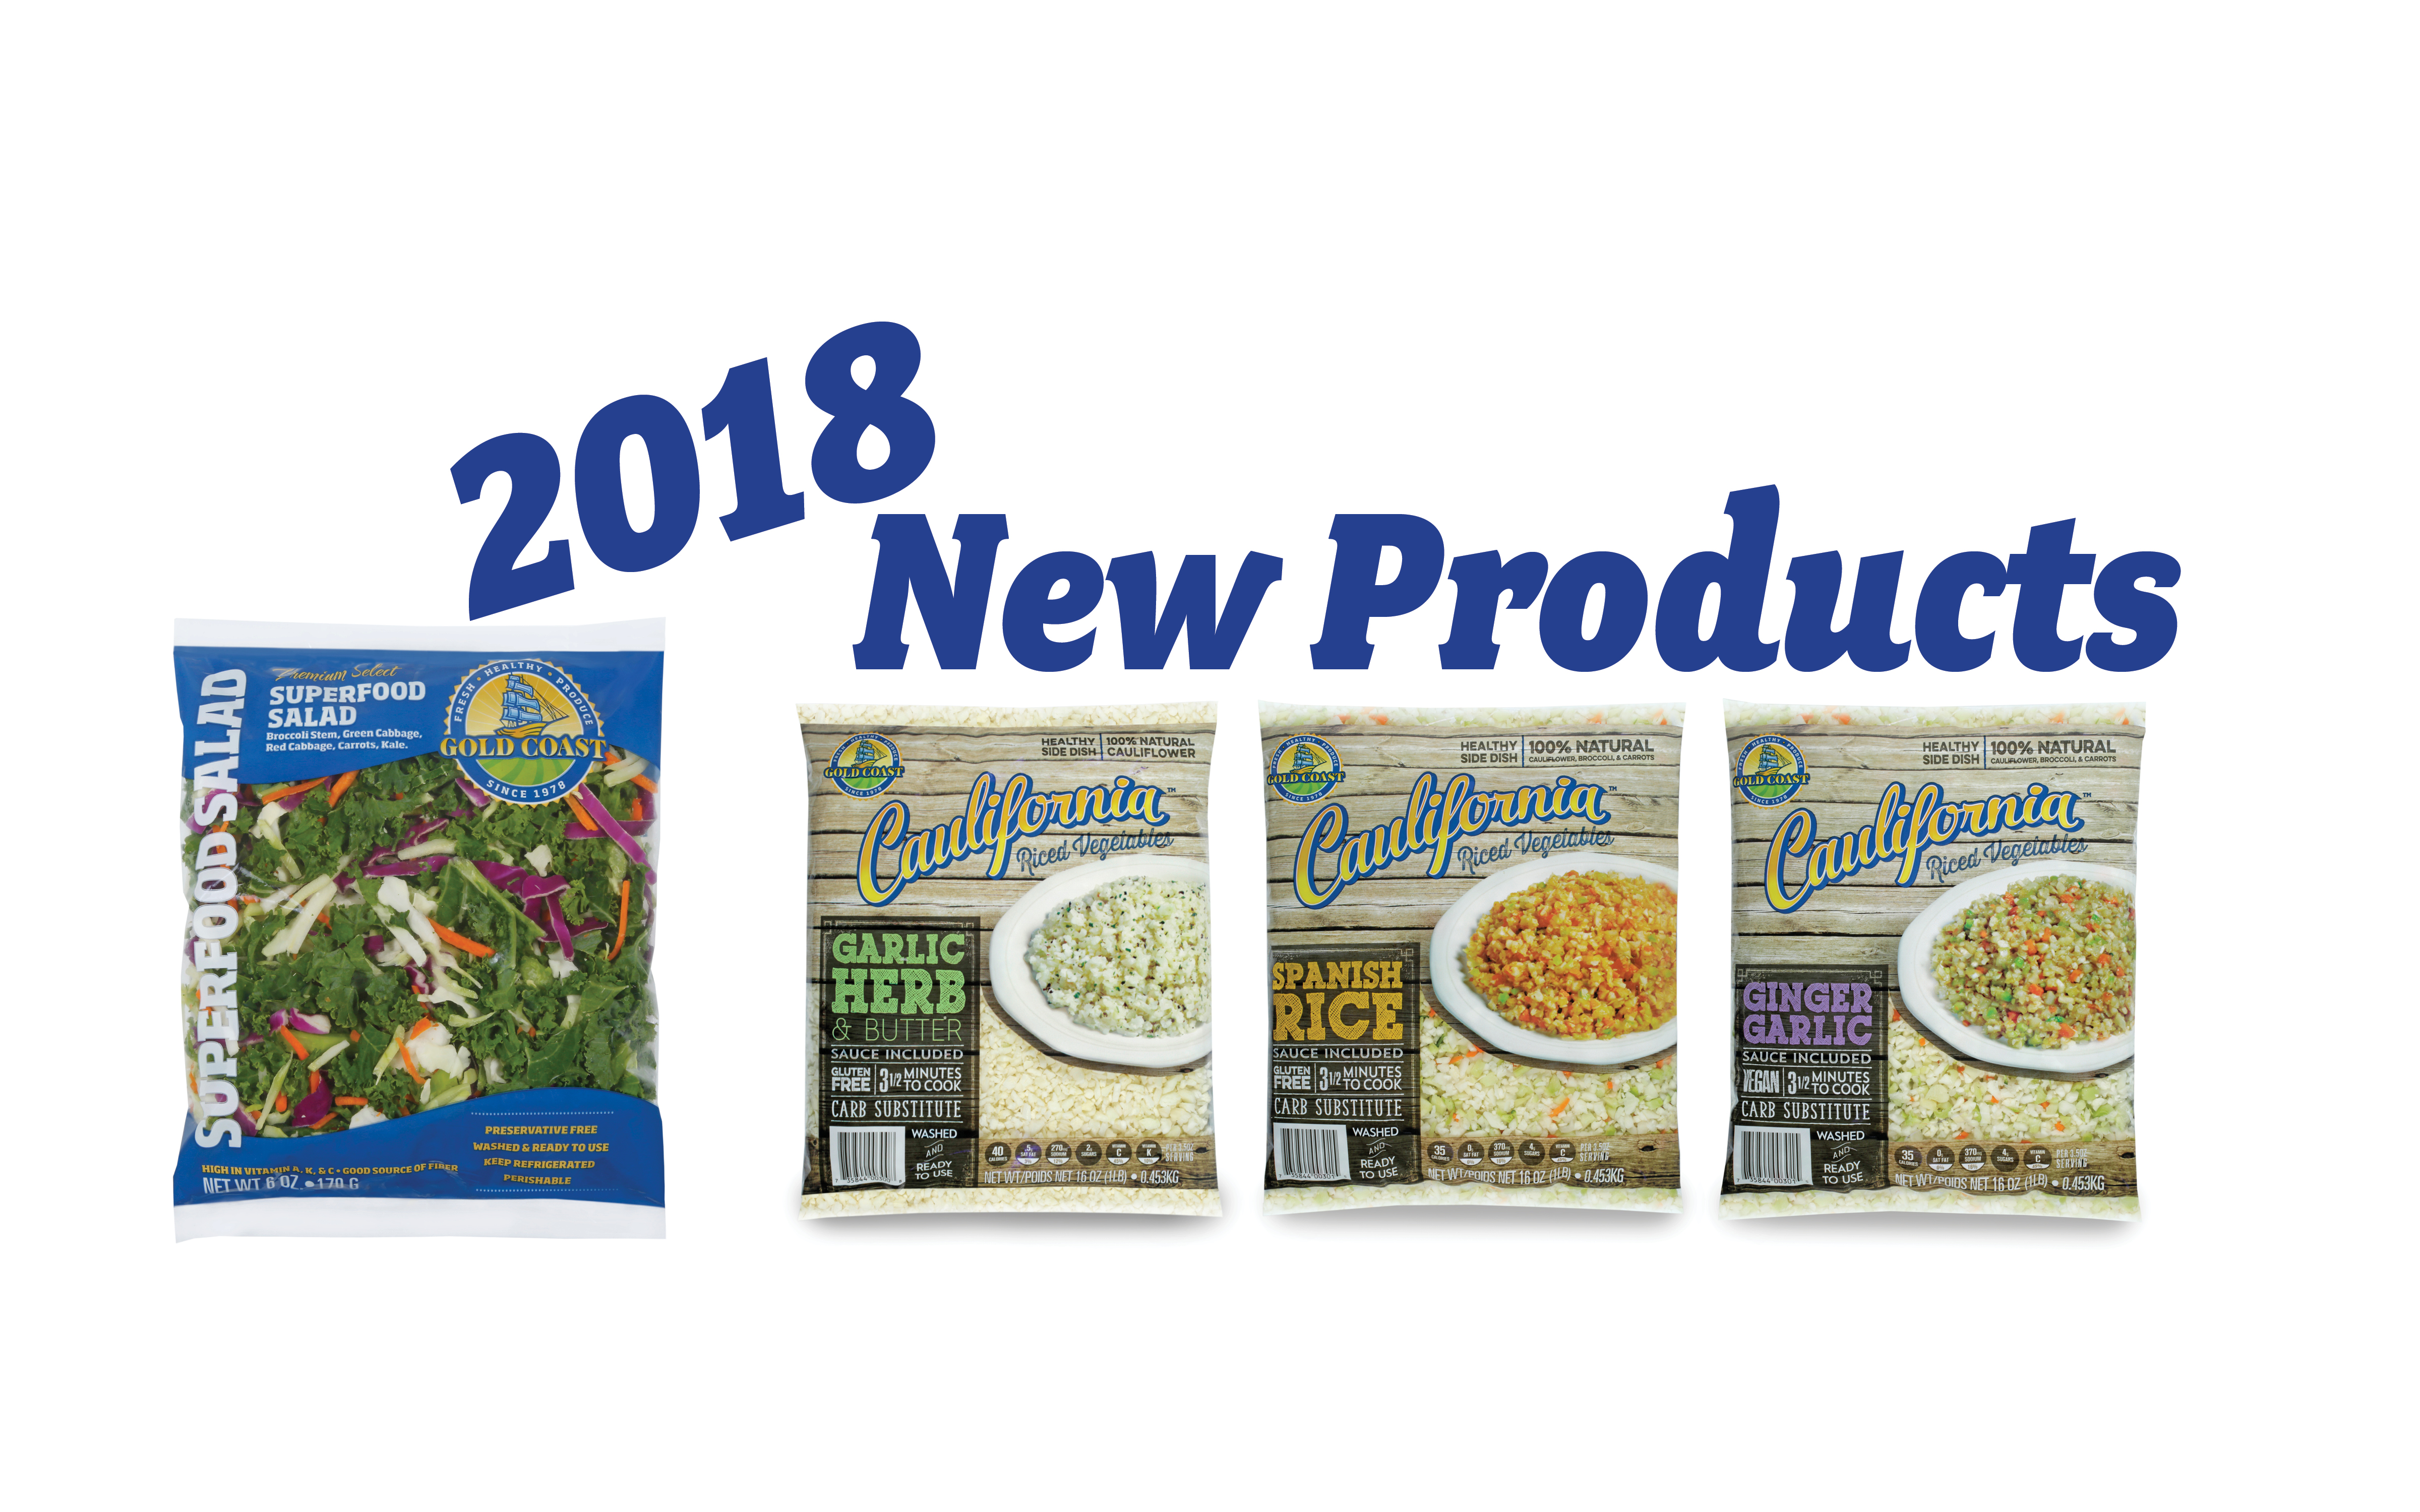 A Look Back at 2018: New Products